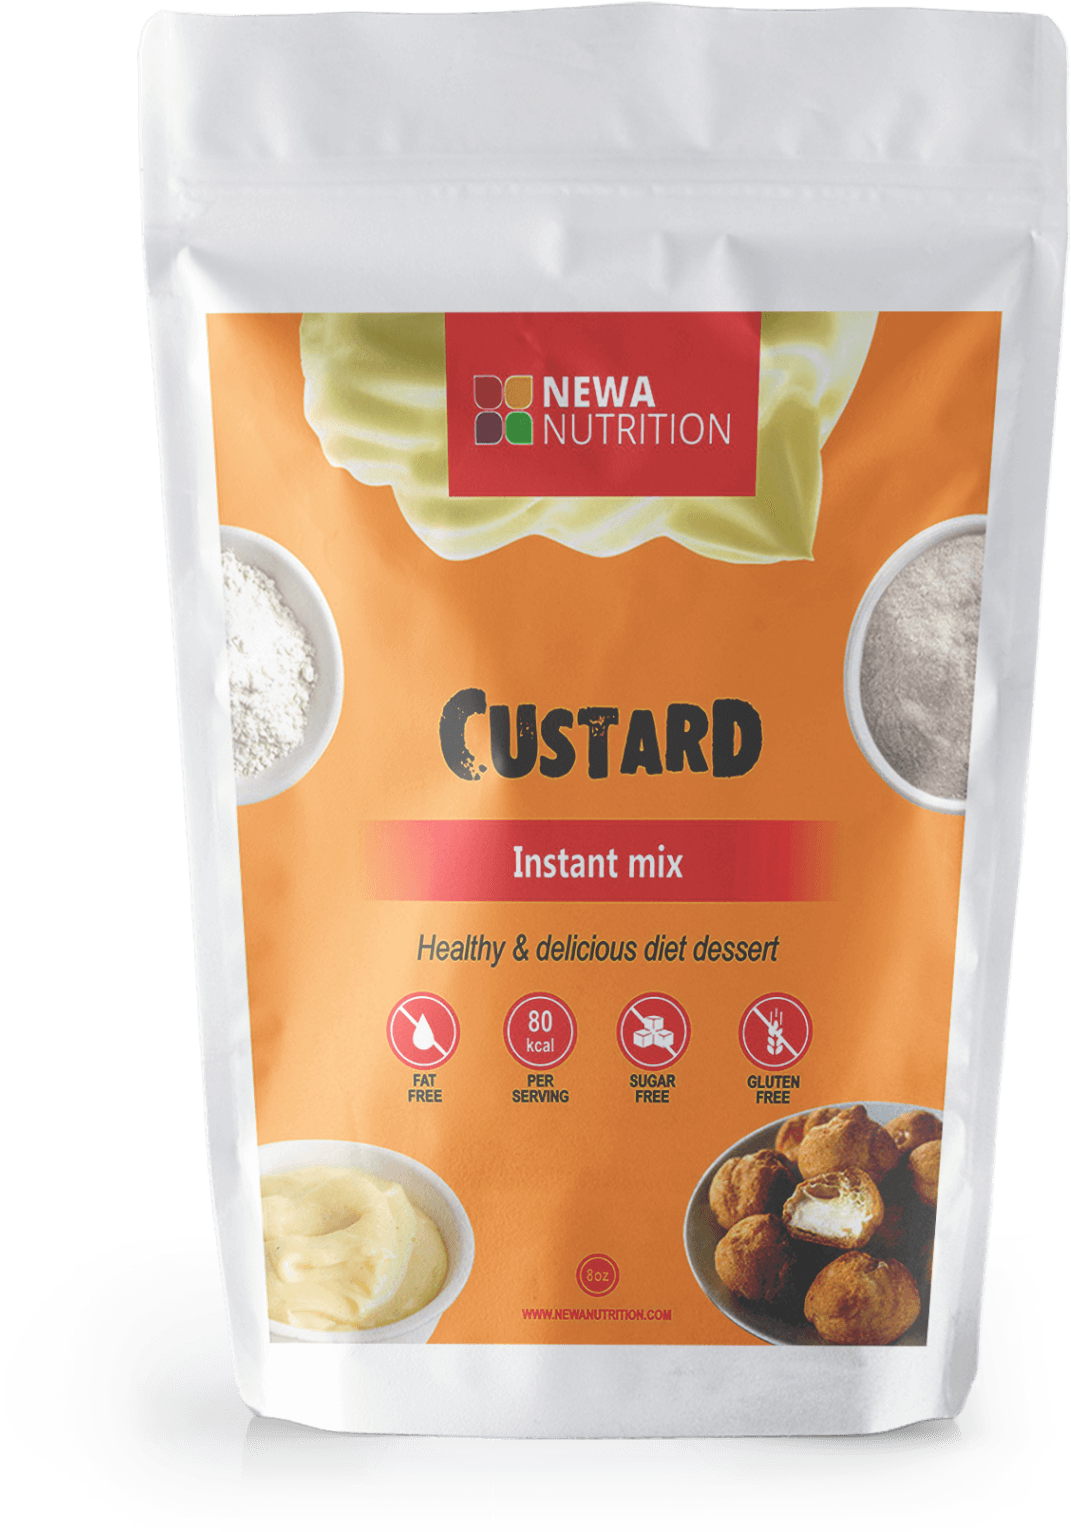 Newa Nutrition Custard Instant Mix Package PNG image